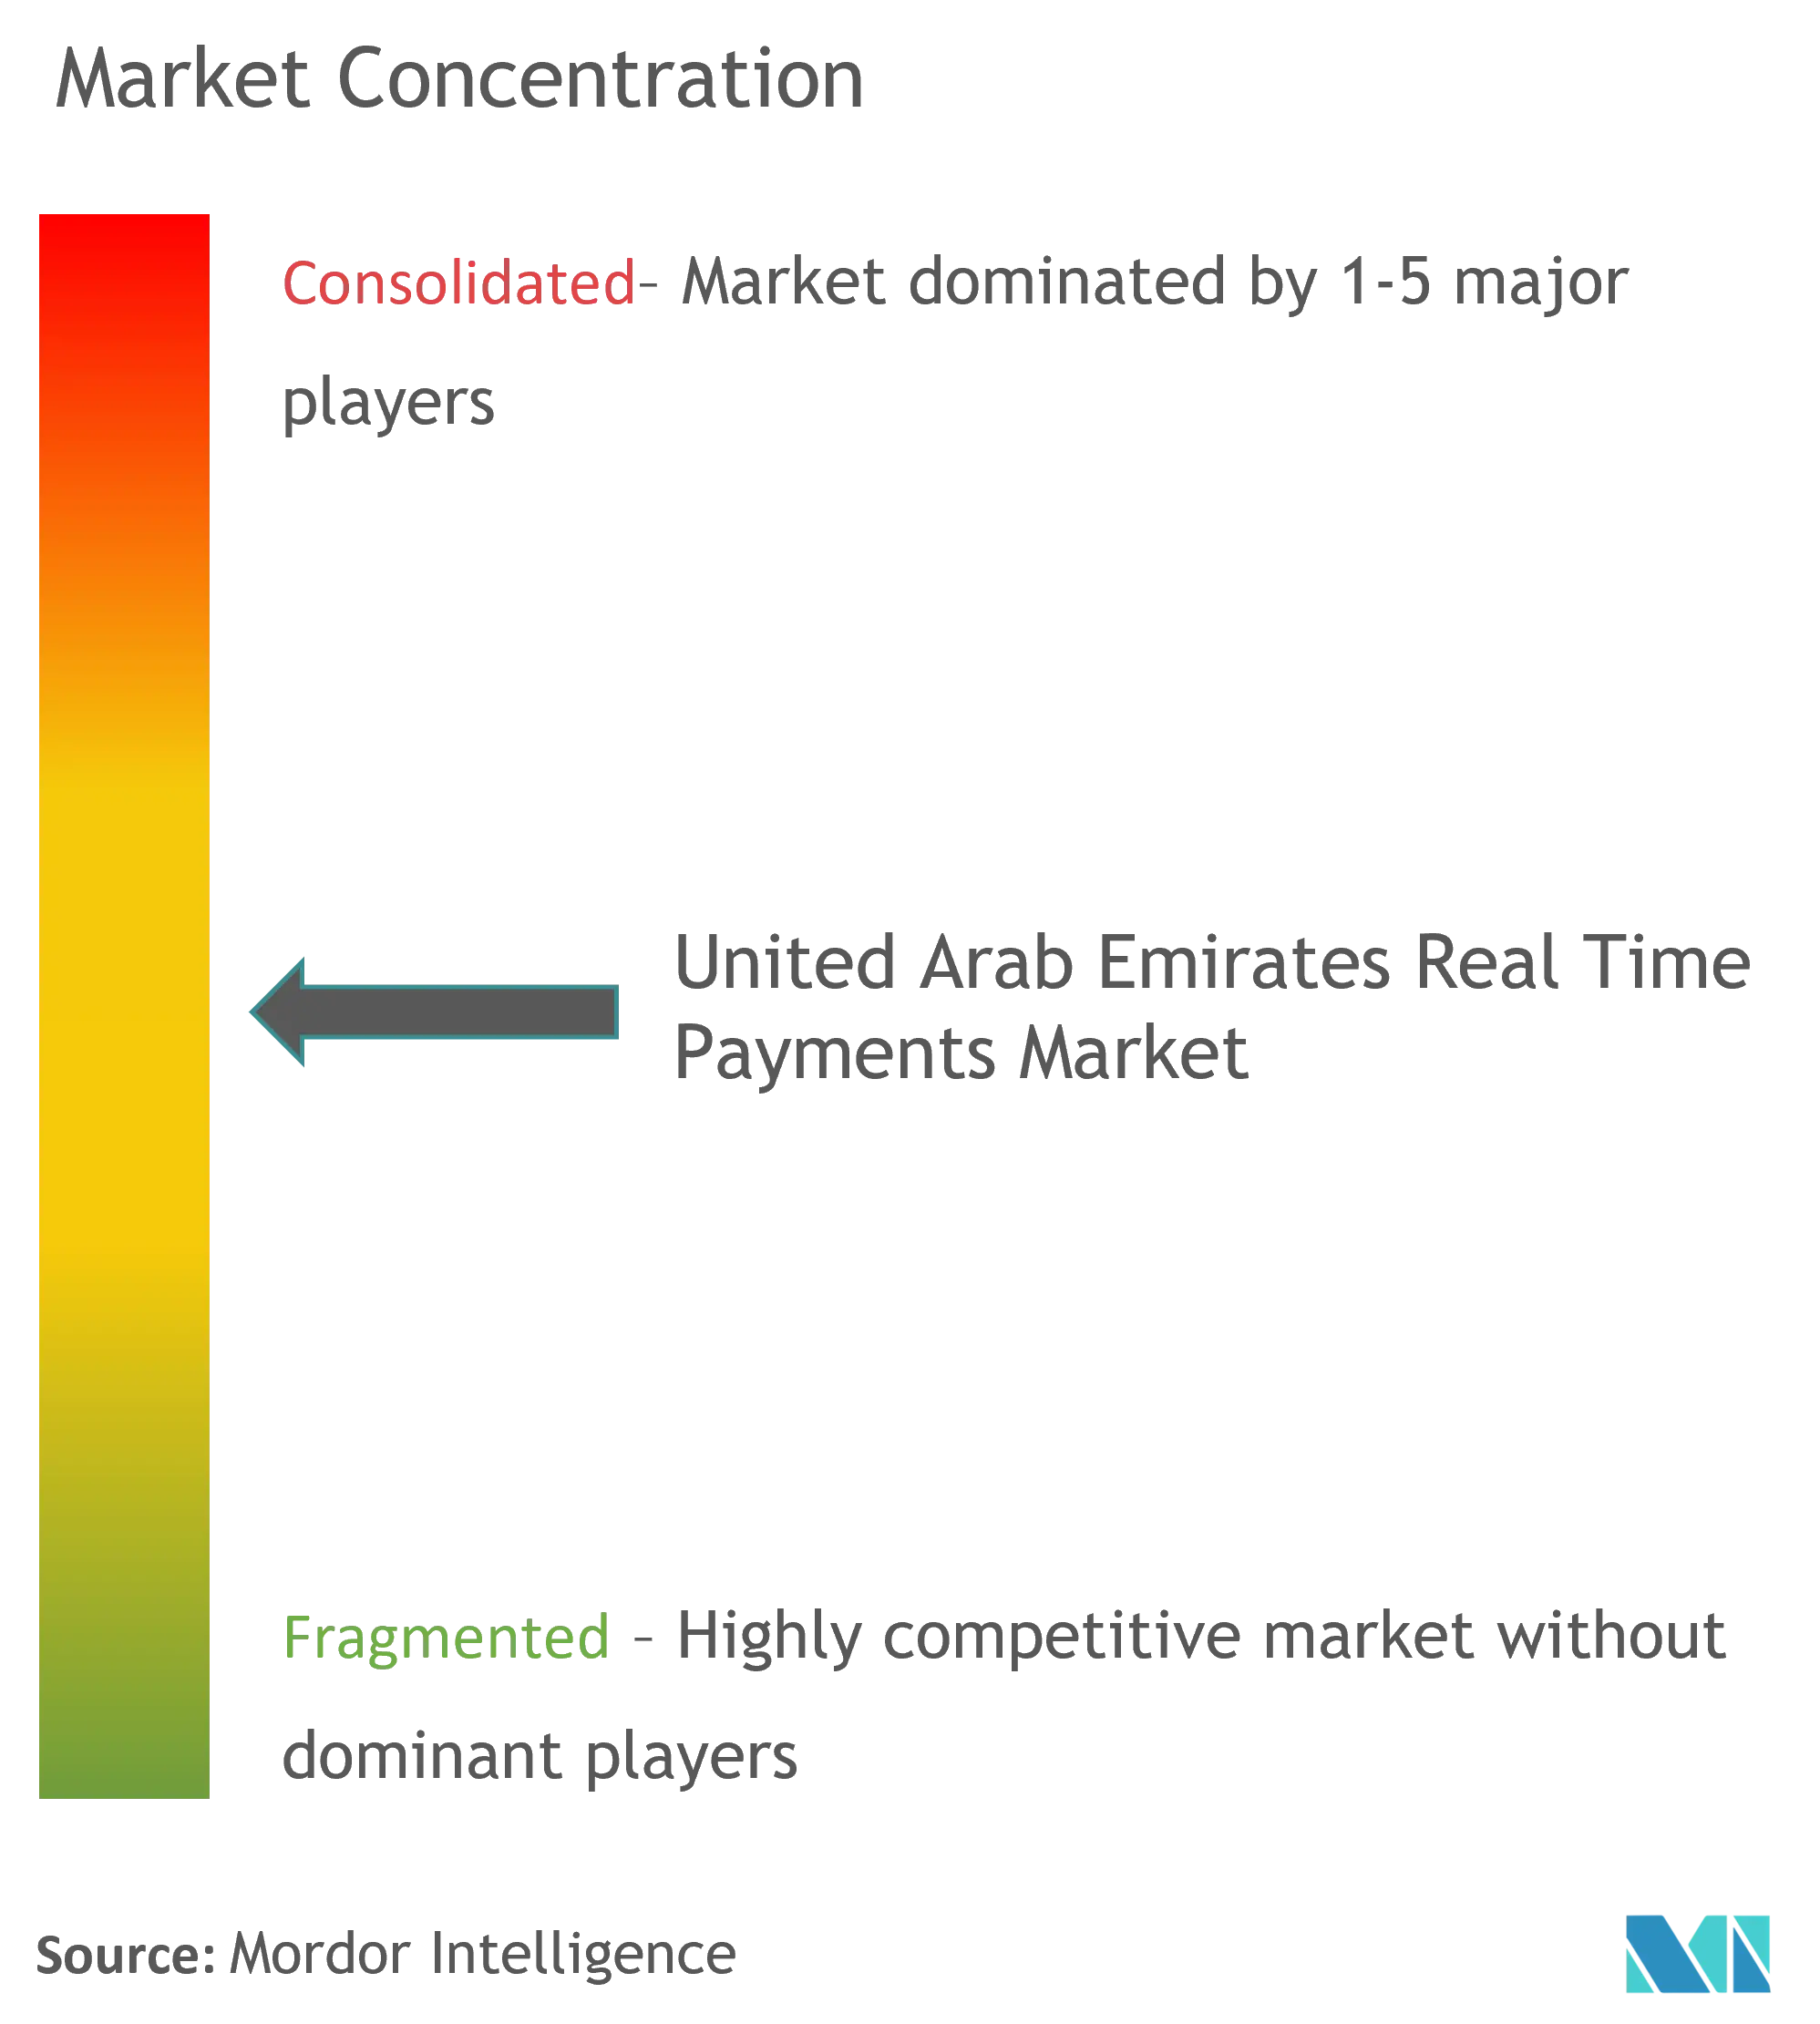 United Arab Emirates Real Time Payments Market - Market Concentration.png